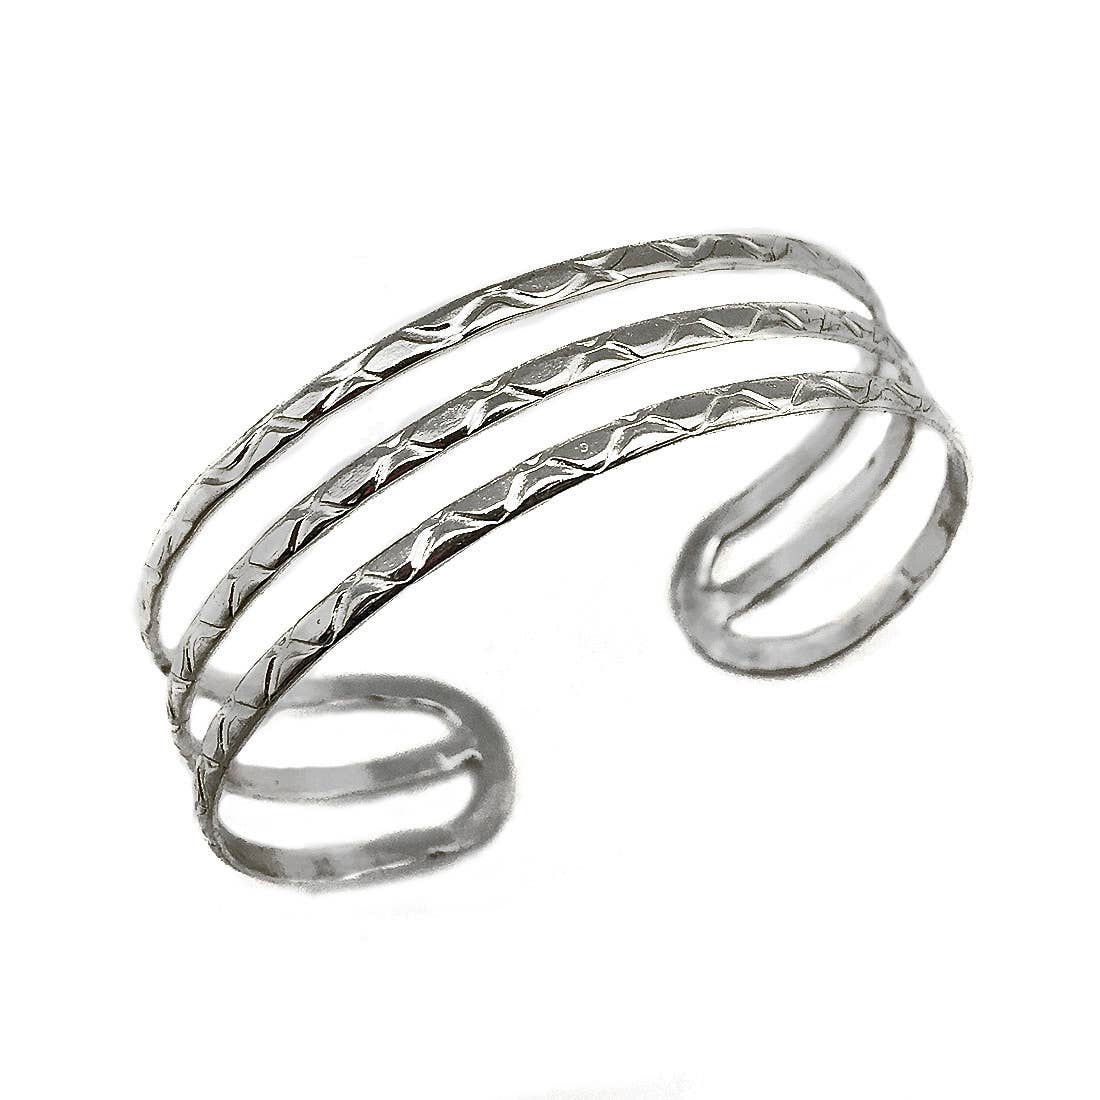 Silver Plated Adjustable Cuff Bracelet - 3 Textured Bands